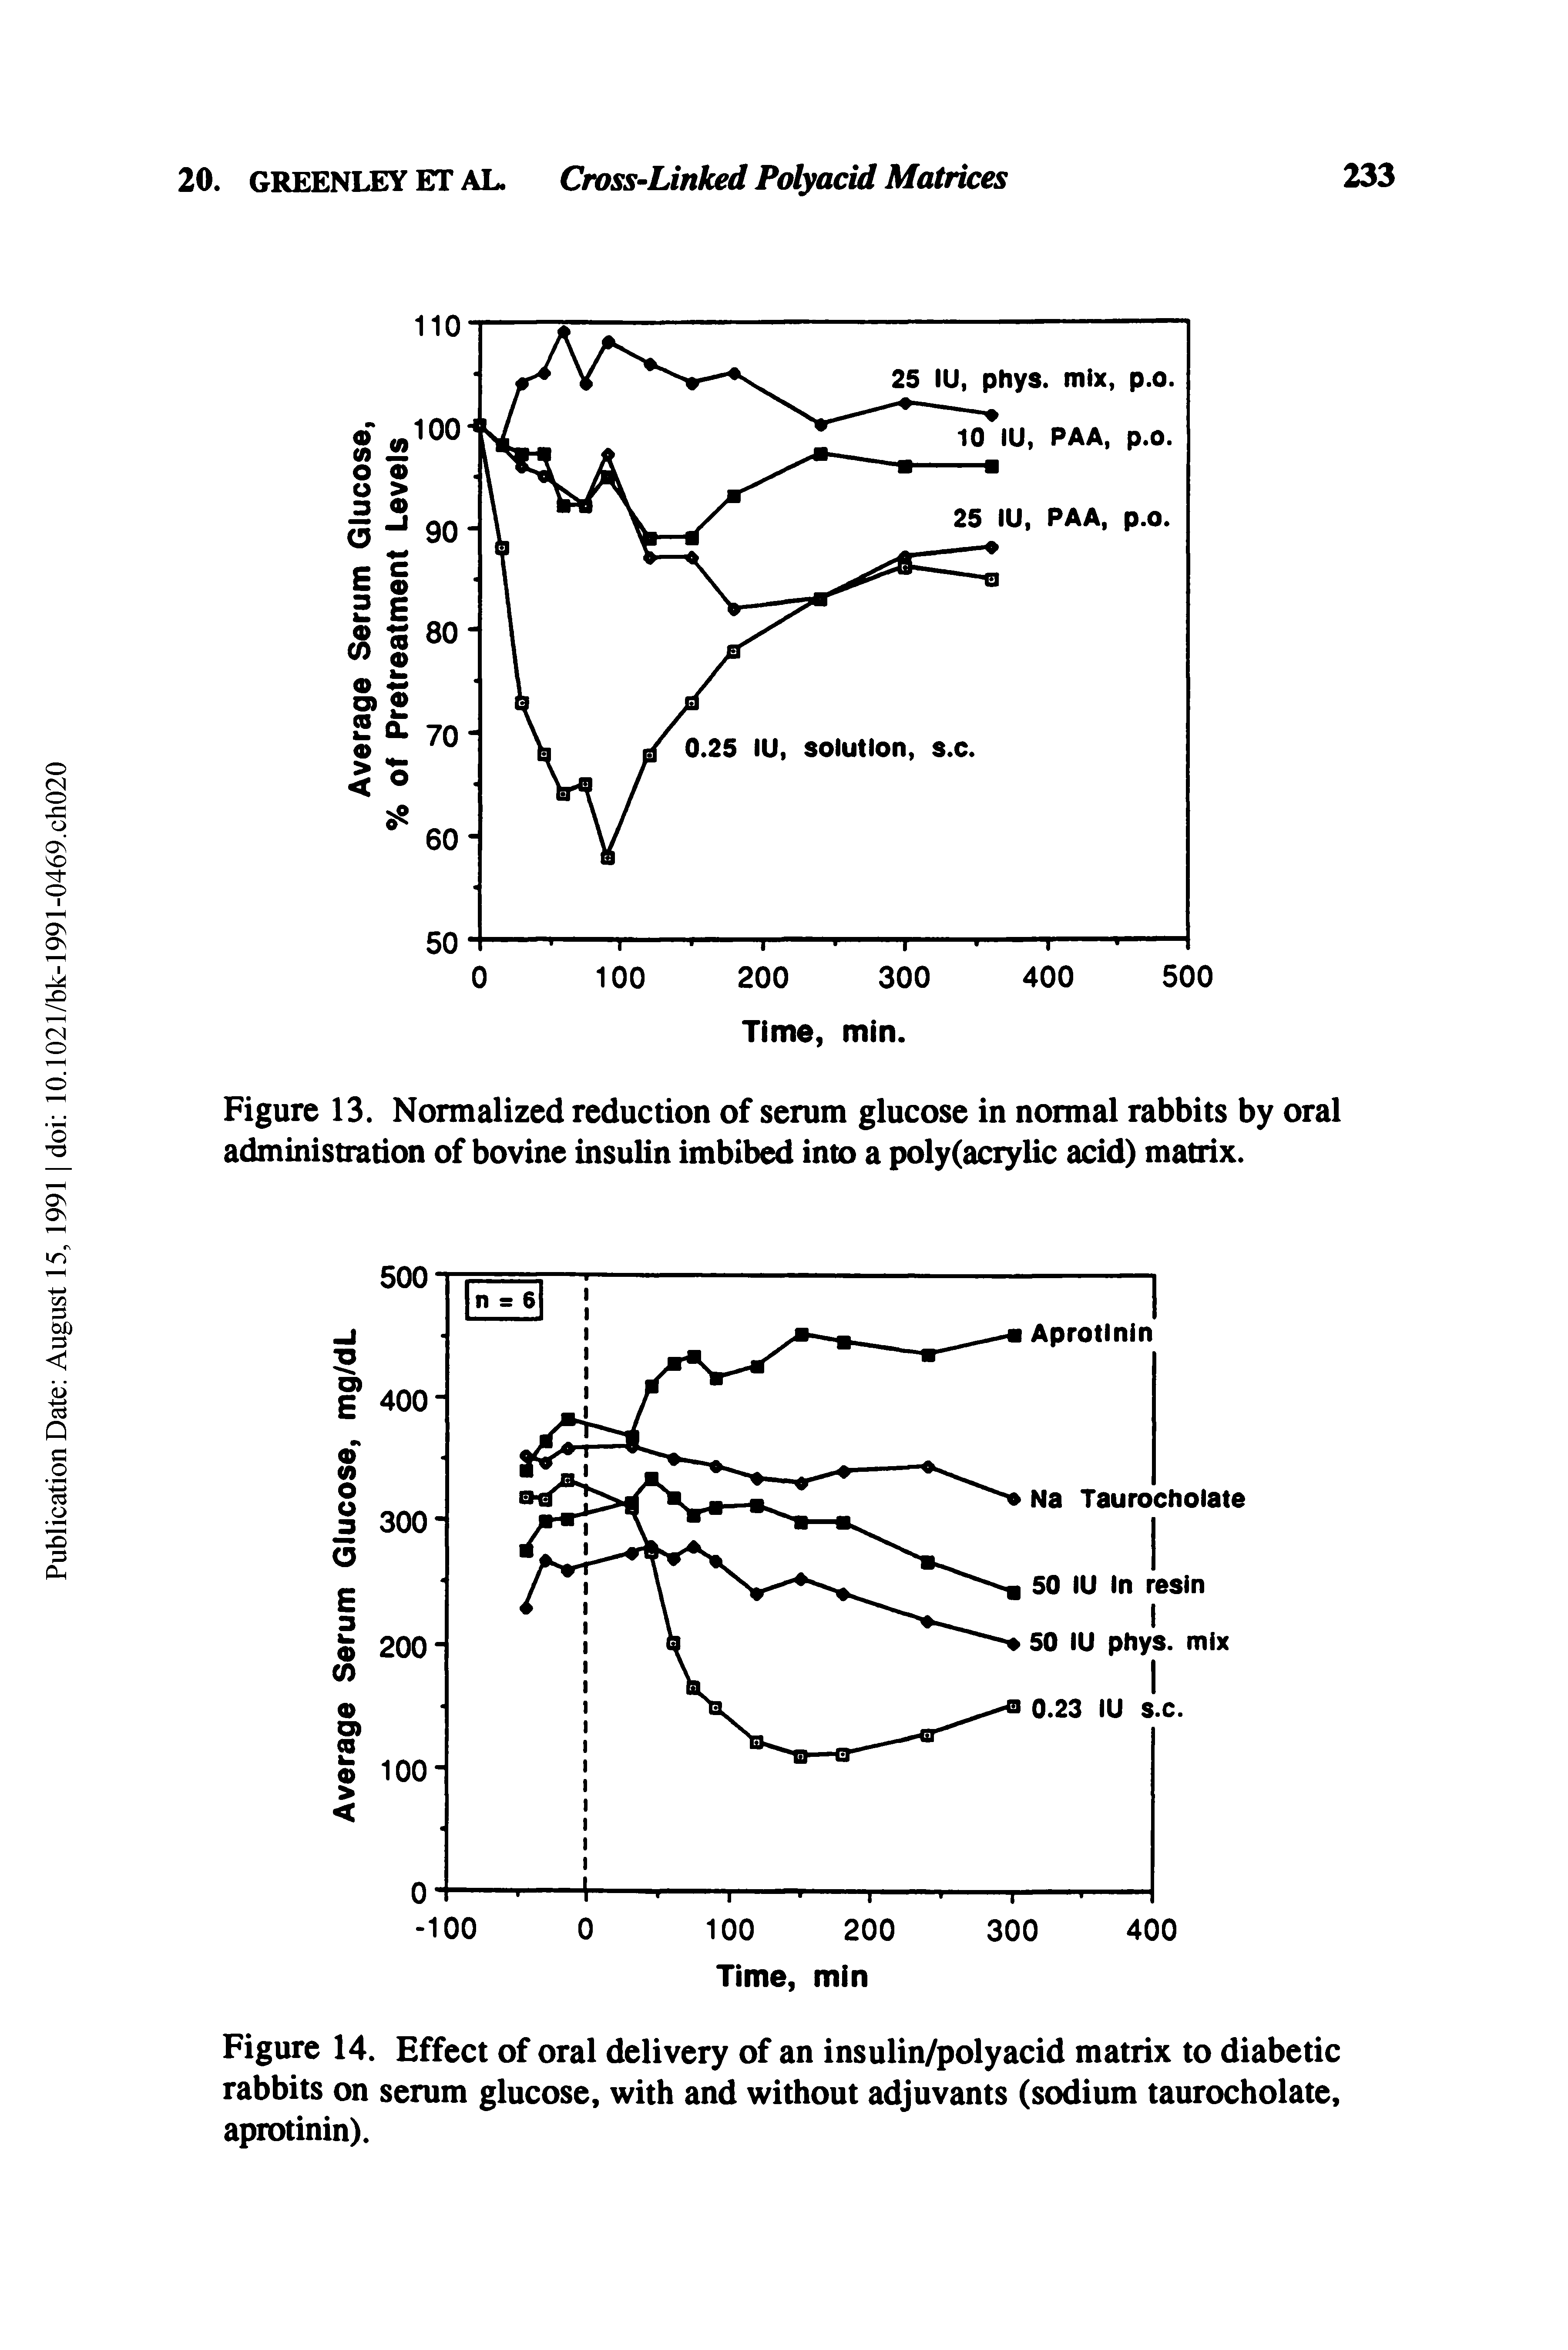 Figure 13. Normalized reduction of serum glucose in normal rabbits by oral administration of bovine insulin imbibed into a poly(acrylic acid) matrix.